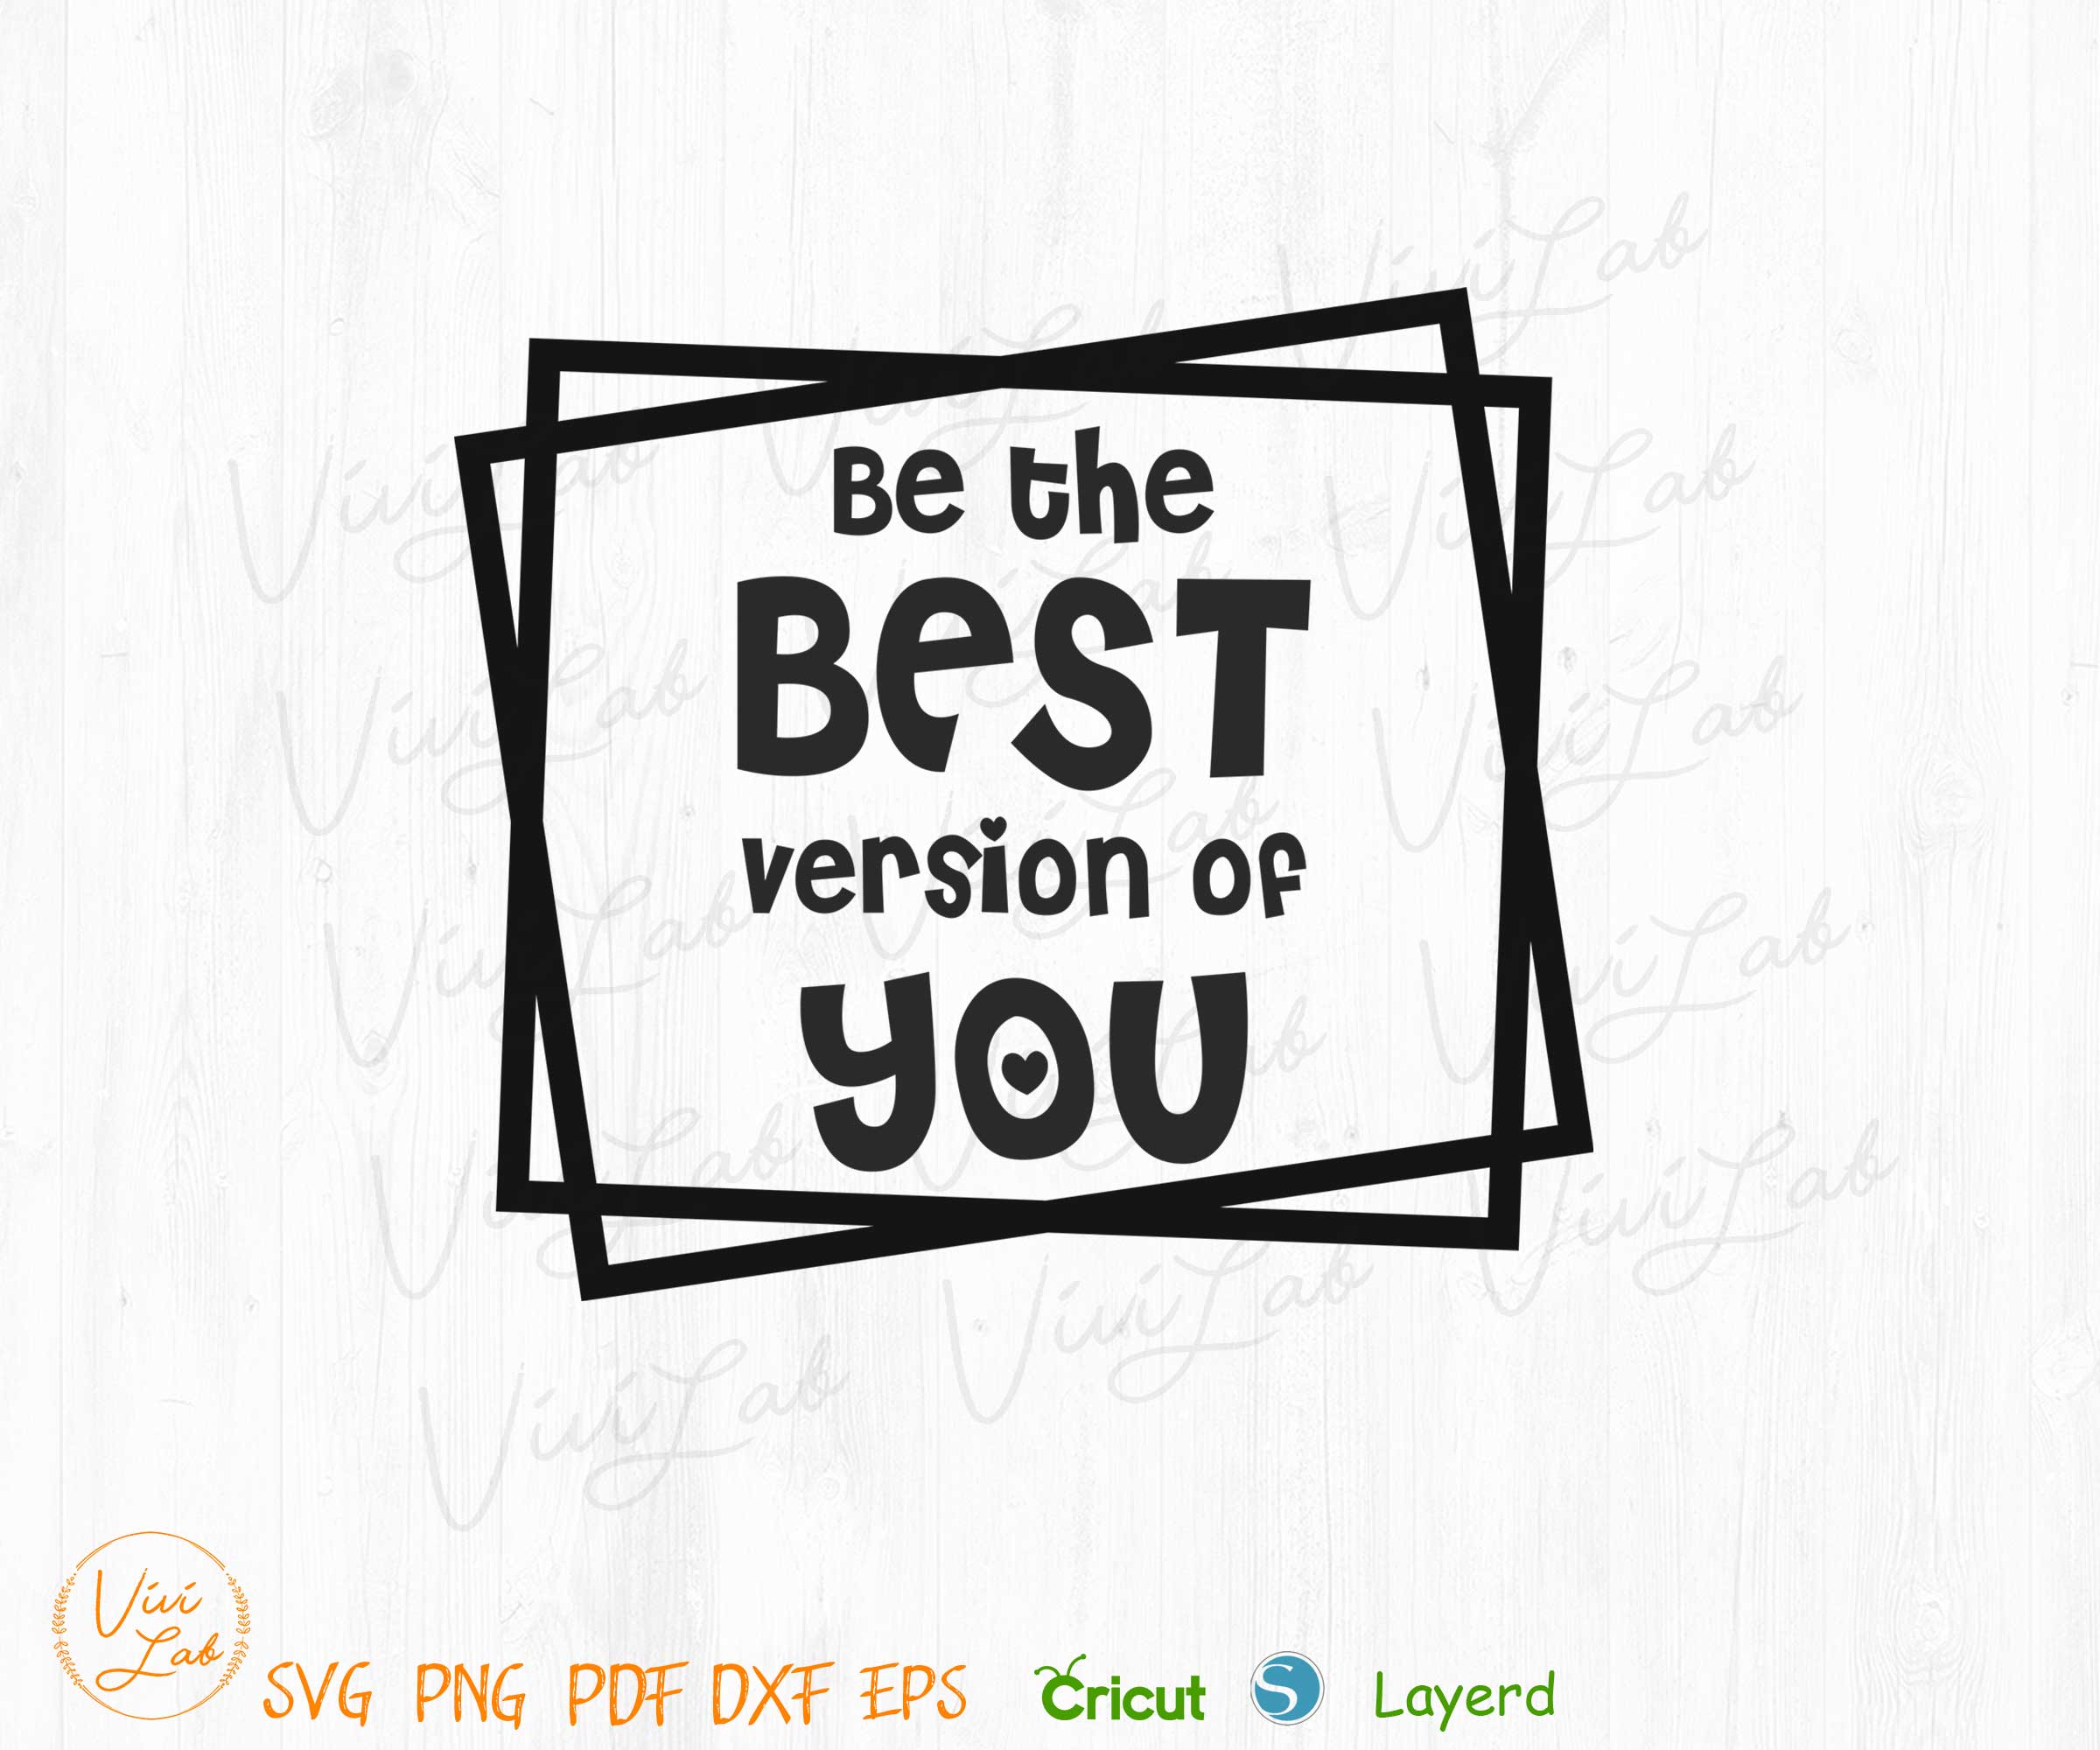 Be the best version of you svg png vector